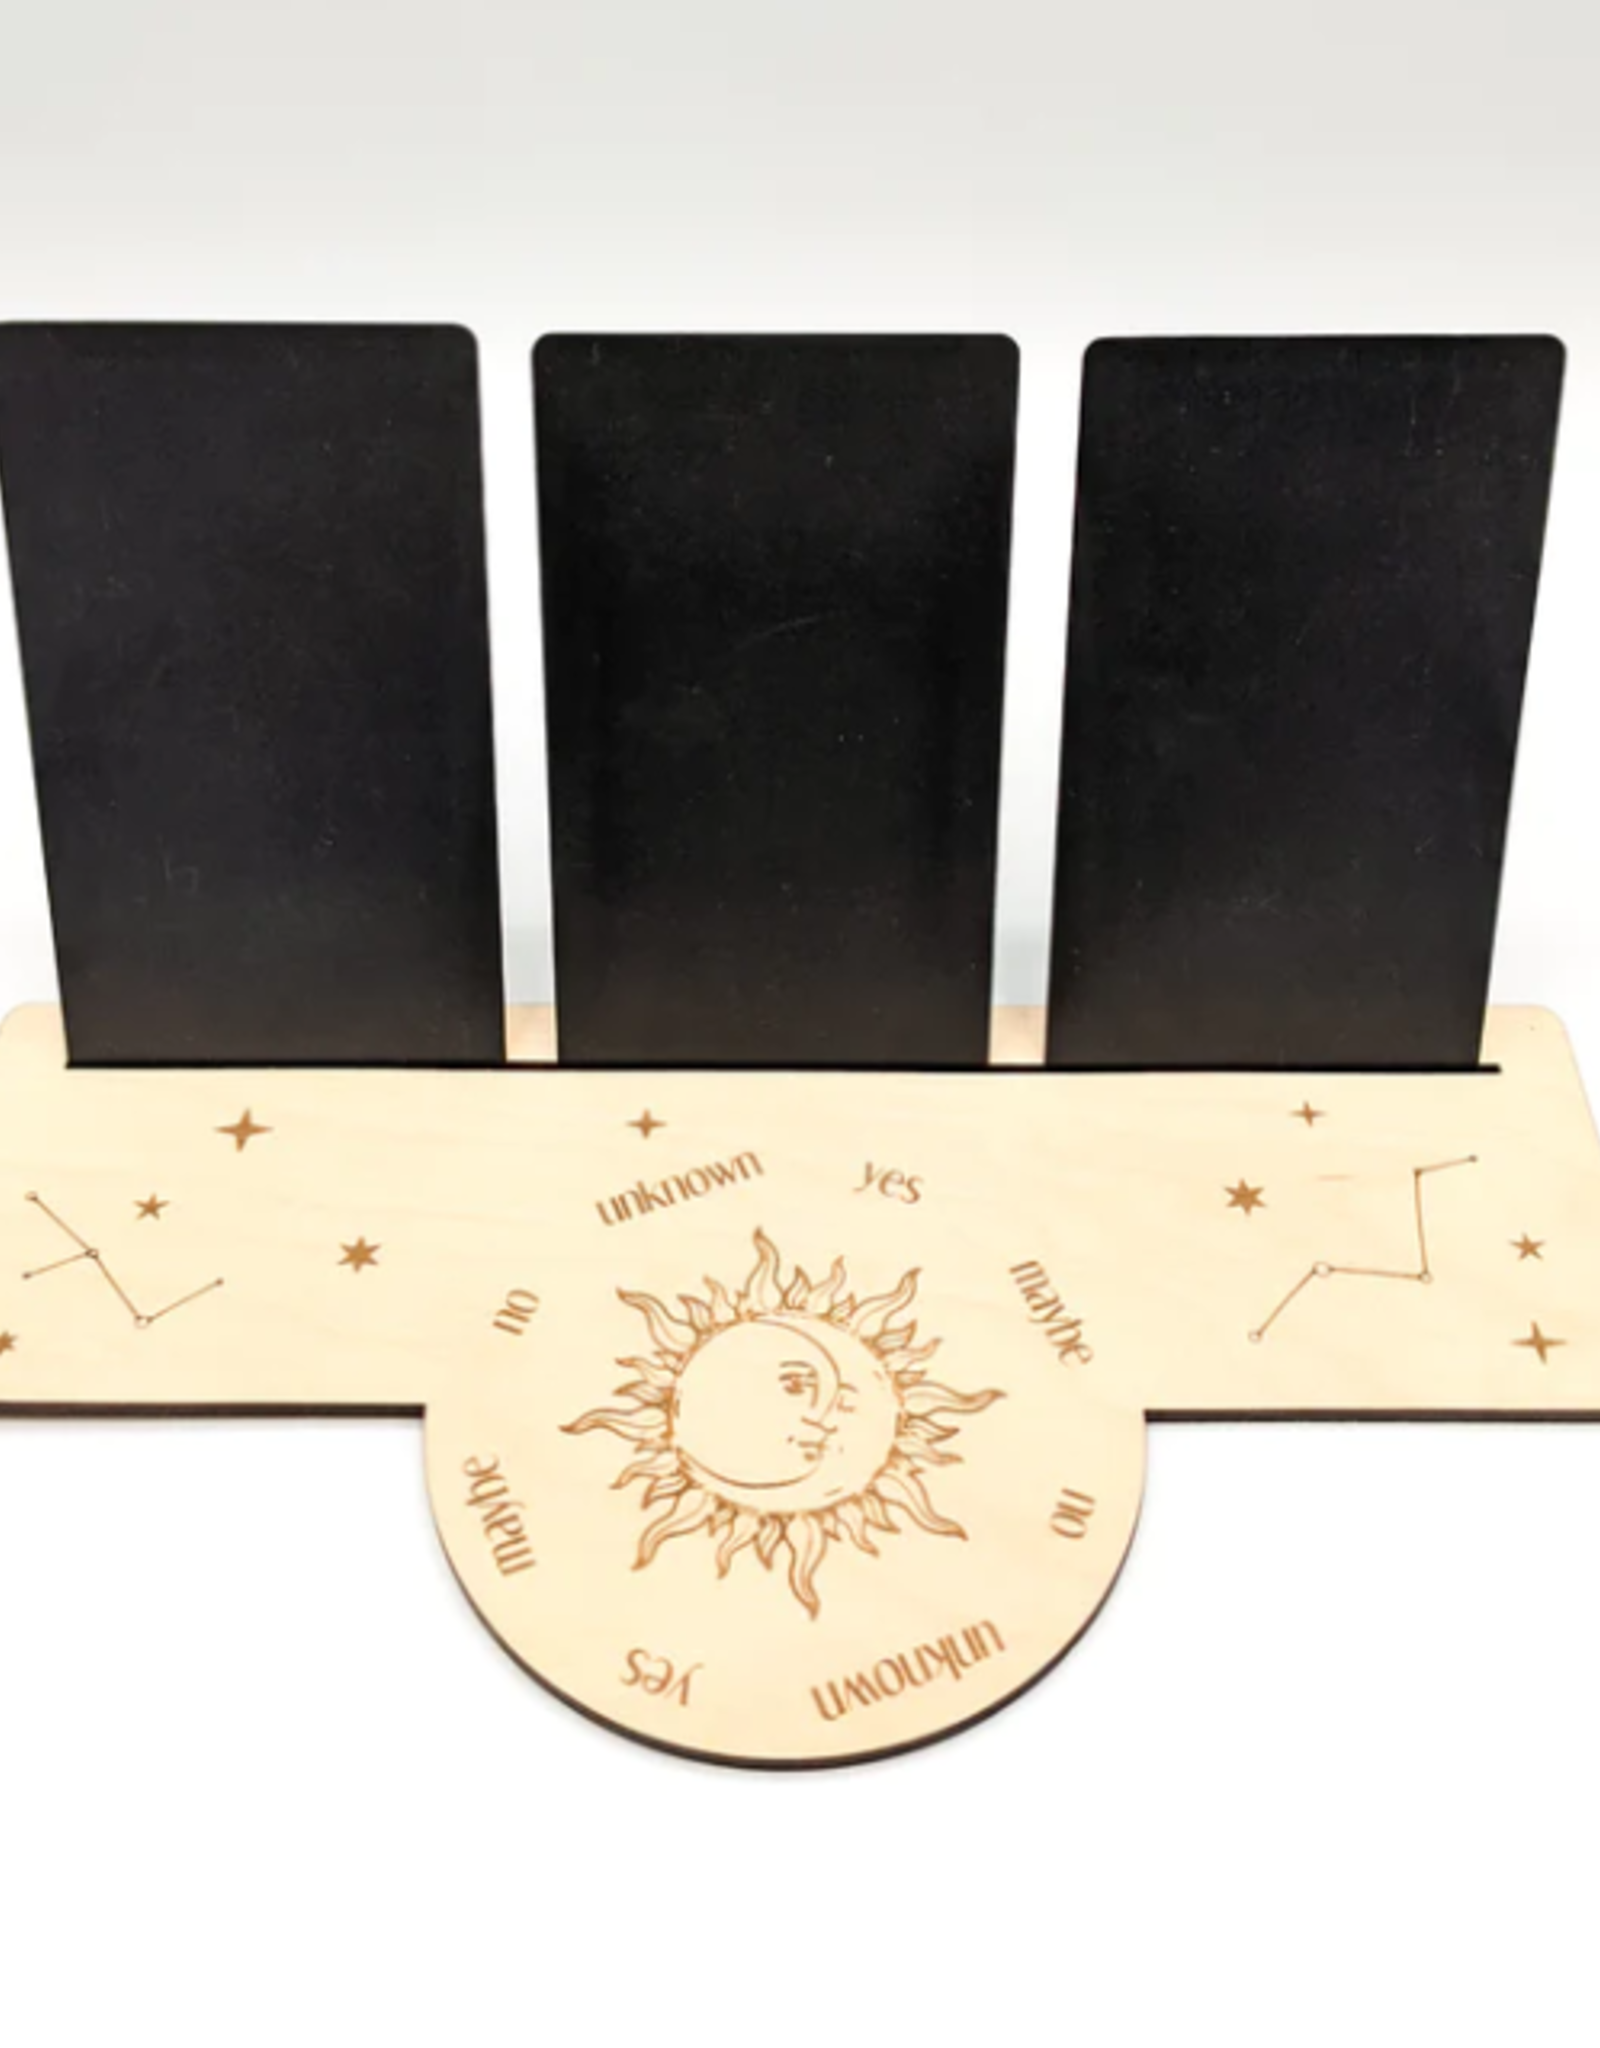 Ritual Pursuits Pendulum Board Tarot Card Stand with Constellations